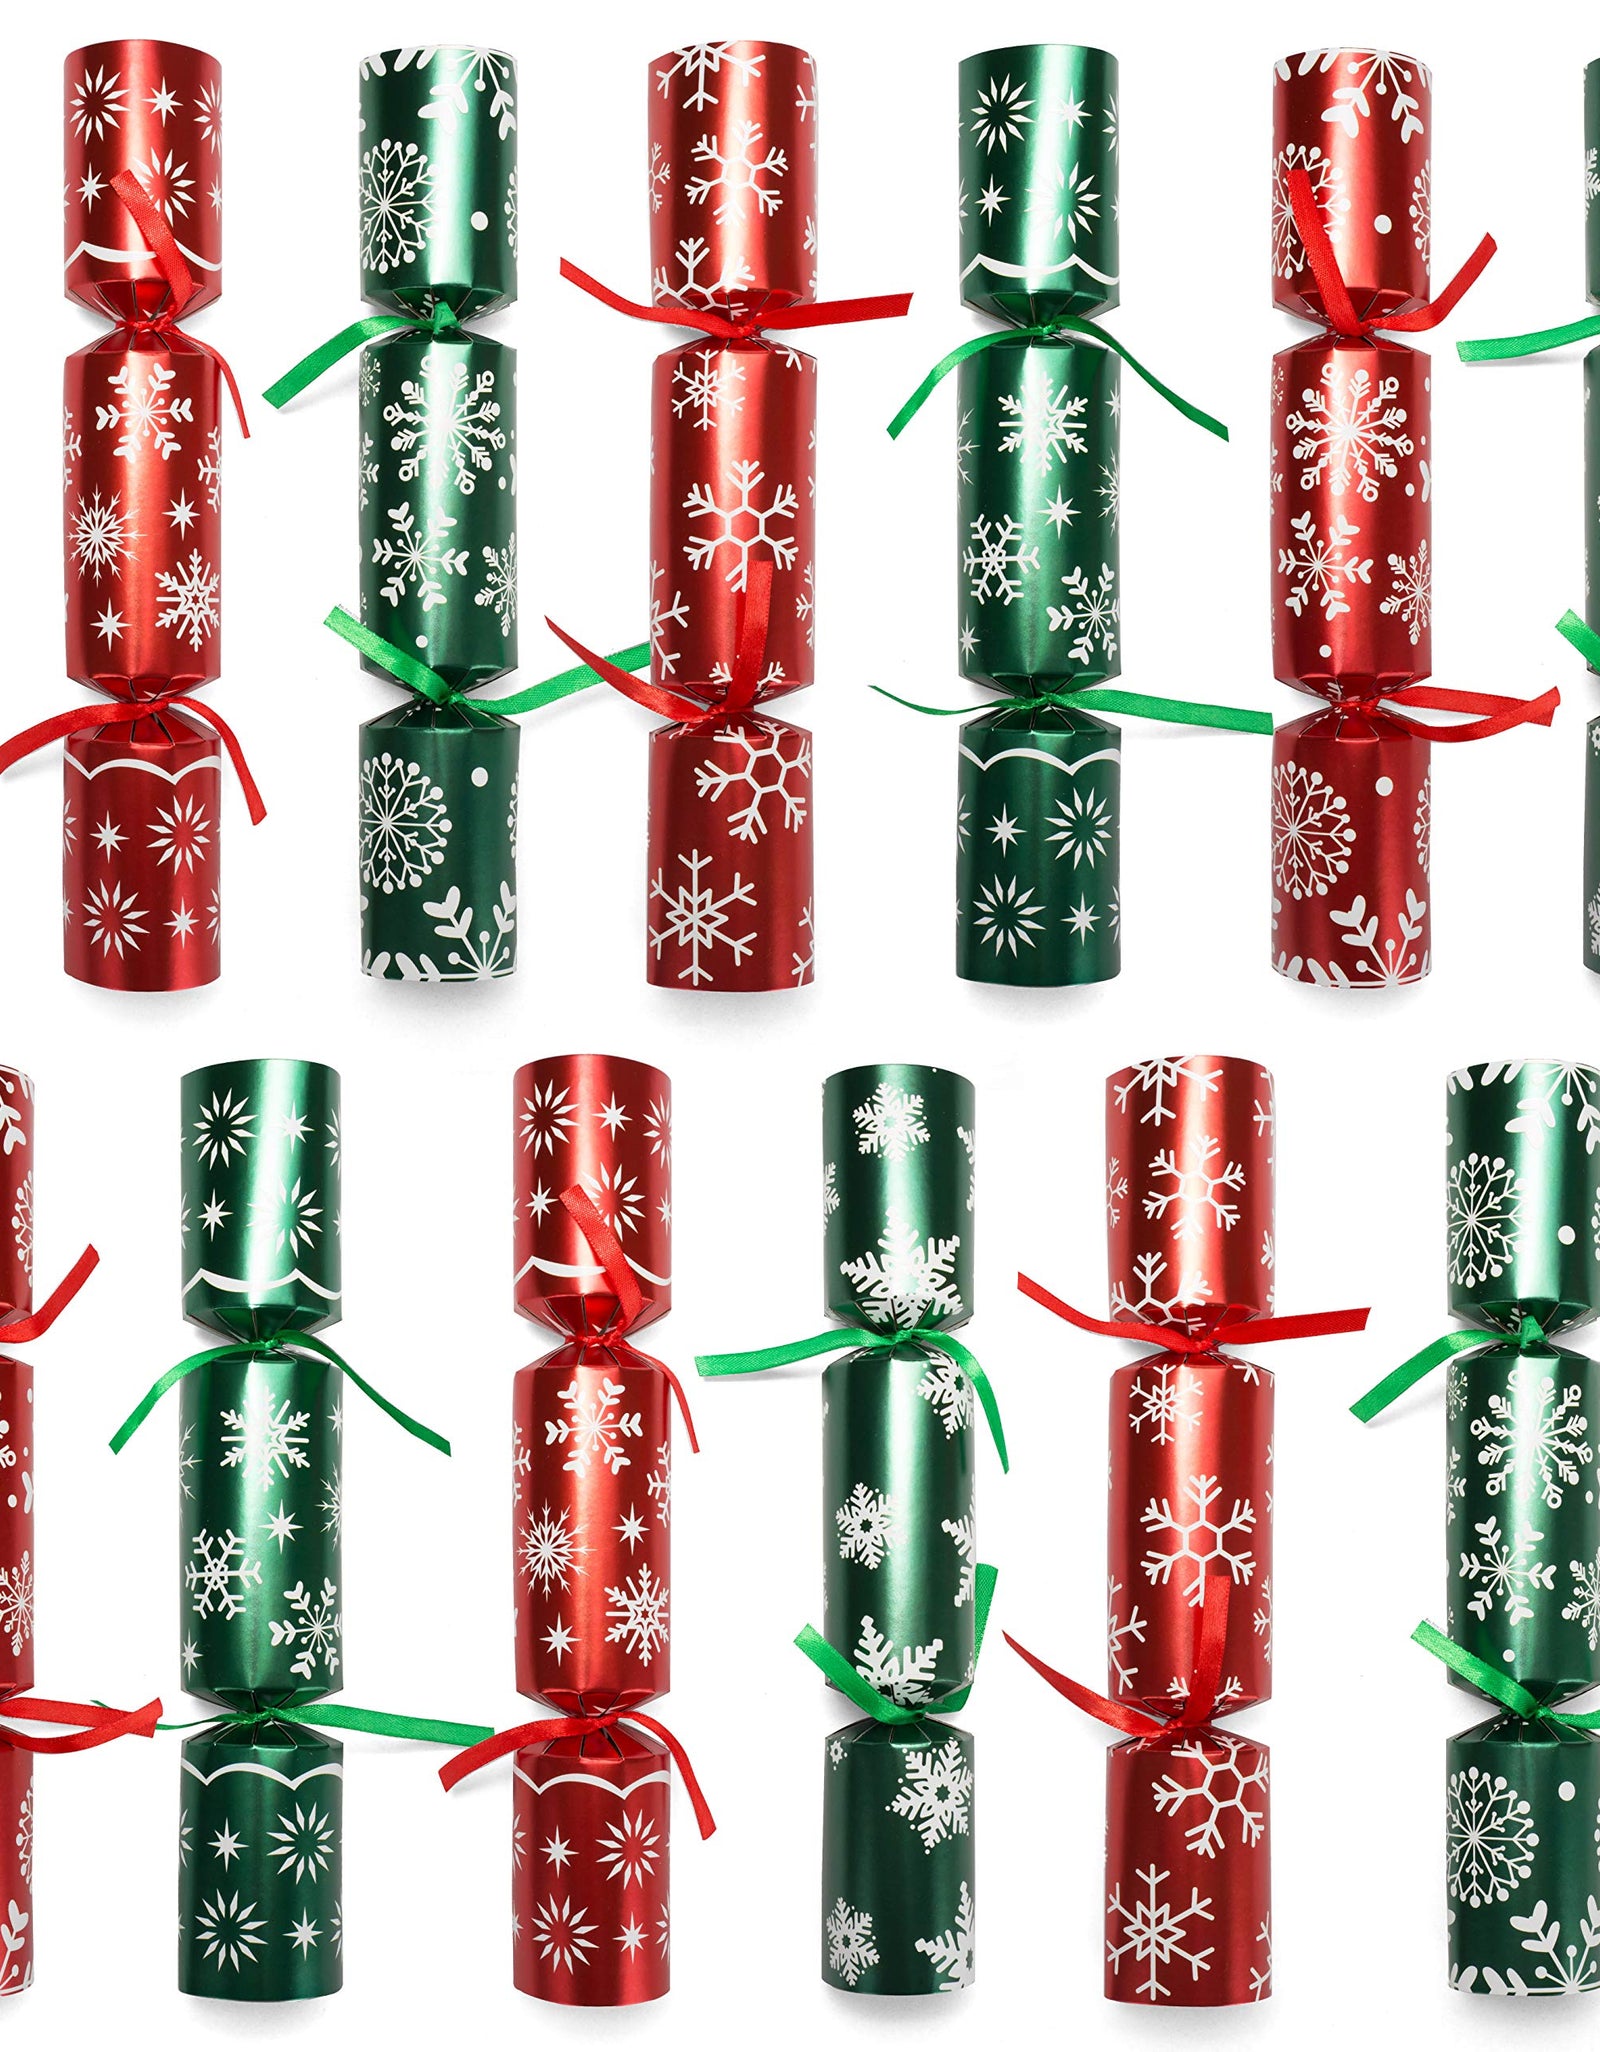 10” Christmas Party Table Favor(12 Pack) with Red & Green Snowflake Design, with Party Hat, Joke & Little Gift Inside, for Xmas Gift, Christmas Seasonal Holiday Dinner Traditions